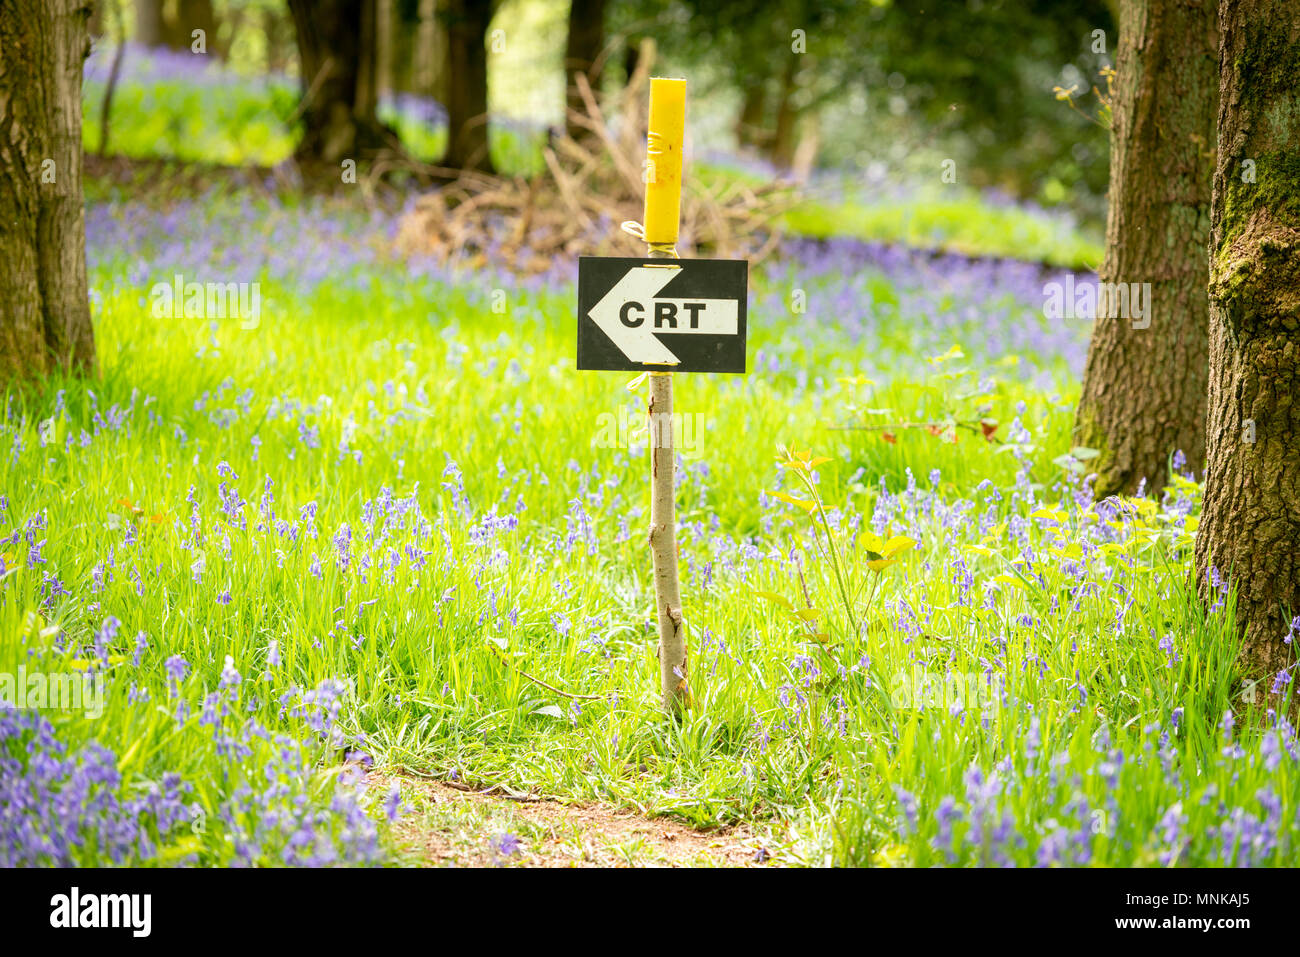 A sign for the CRT or Countryside Restoration Trust marking a path in a bluebell wood on an open day in Margaret Wood Yorkshire UK Stock Photo